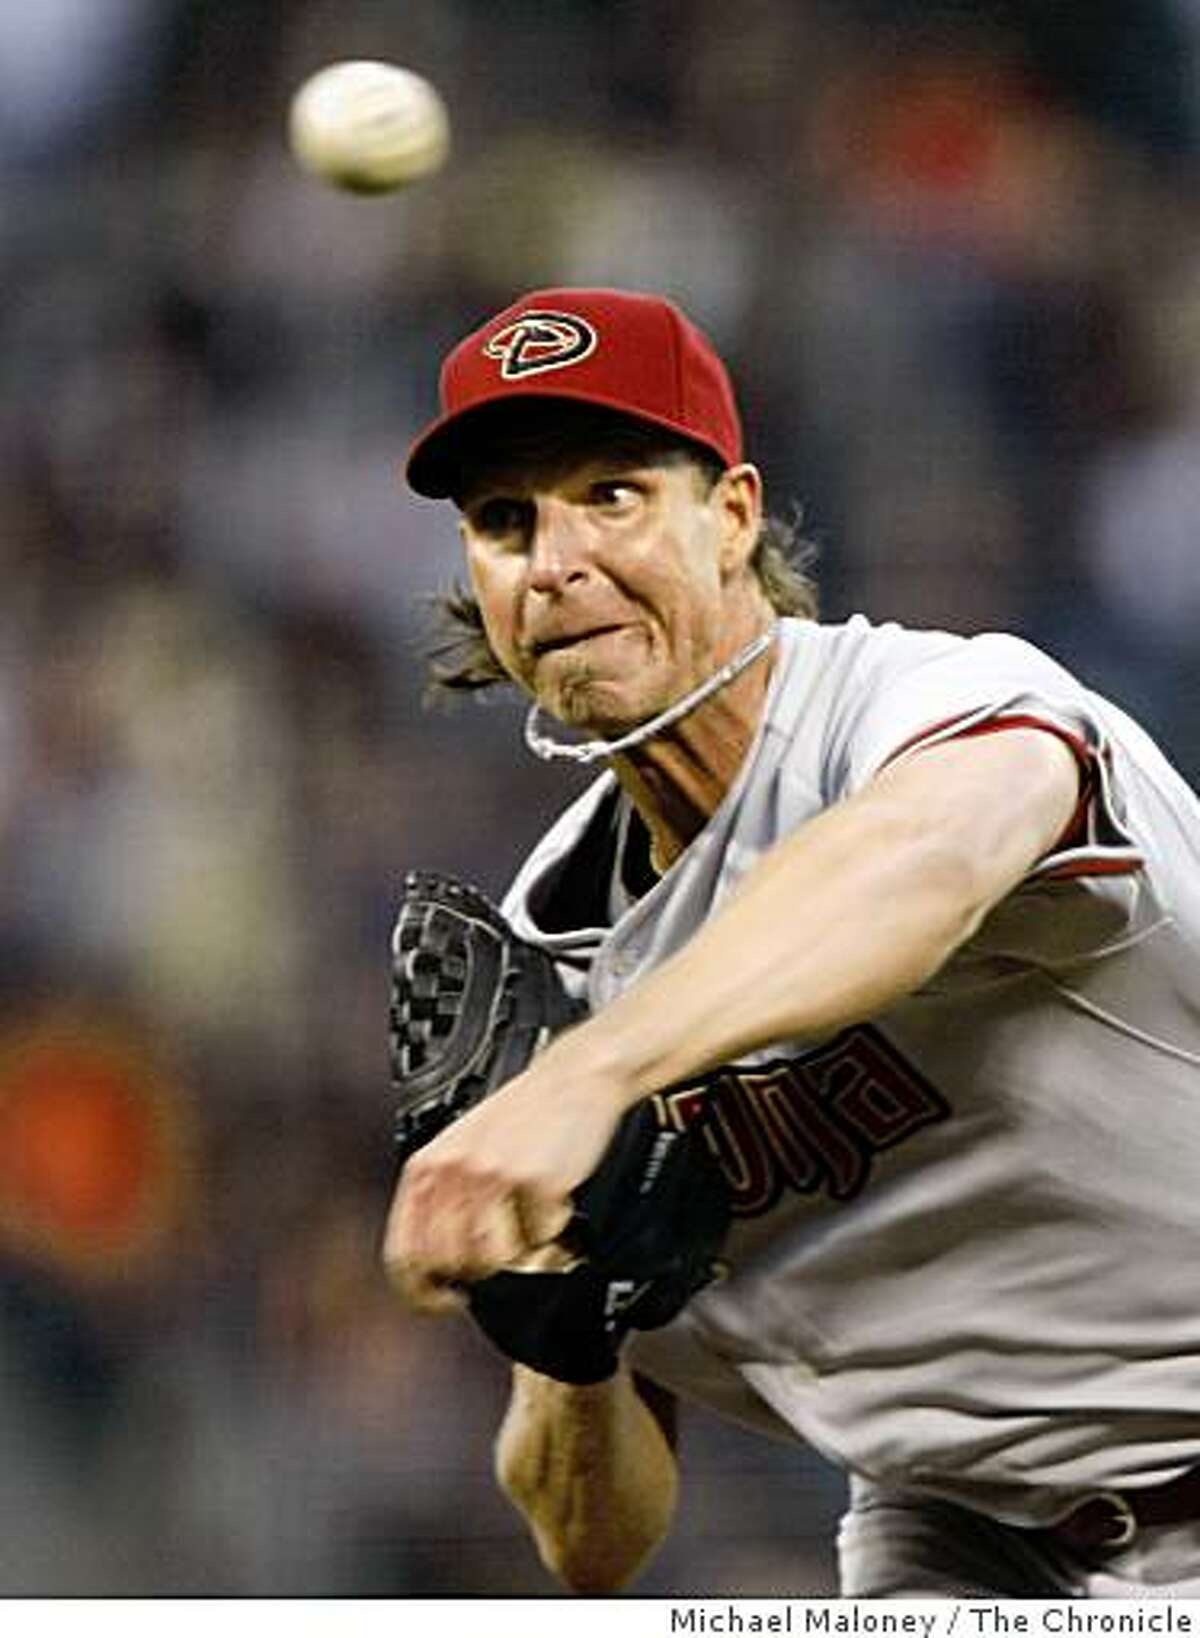 Arizona Diamondbacks starter Randy Johnson pitches in the first inning vs. the Giants at AT&T Park in San Francisco, on April 14, 2008.